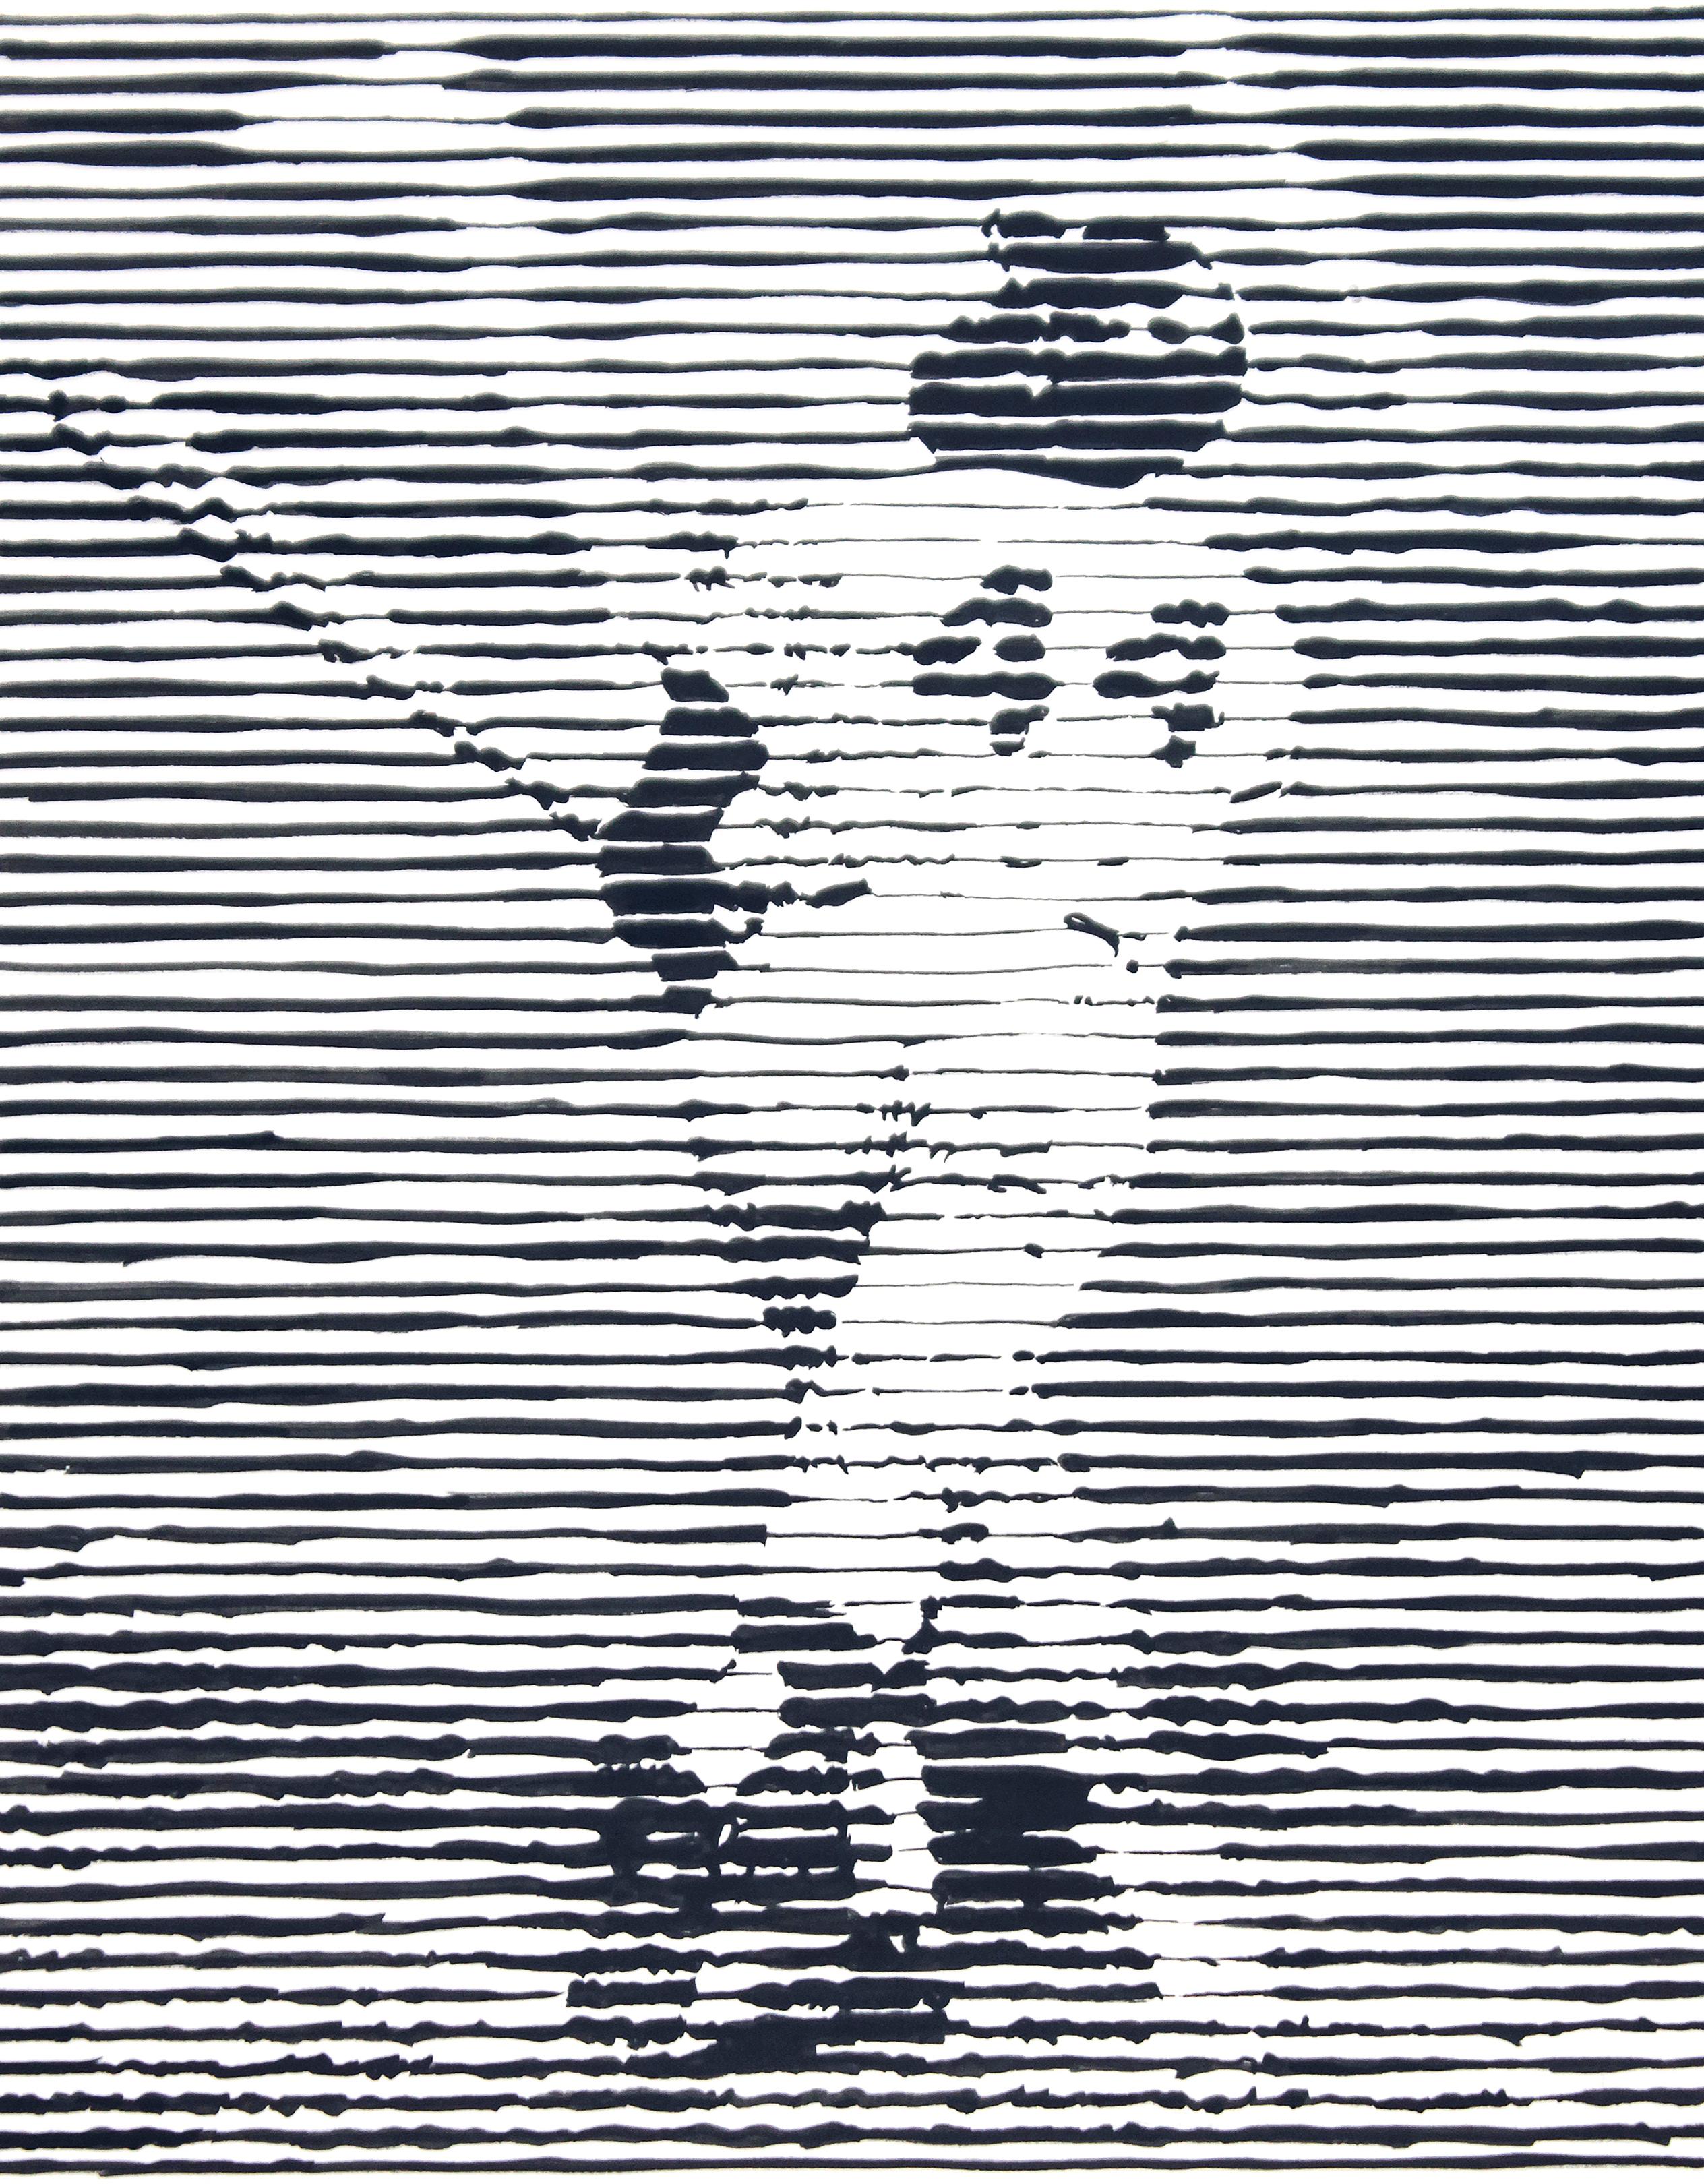 Charles Buckley Figurative Art - Hank Aaron, August 6, 1969, black and white drawing, baseball player, sports